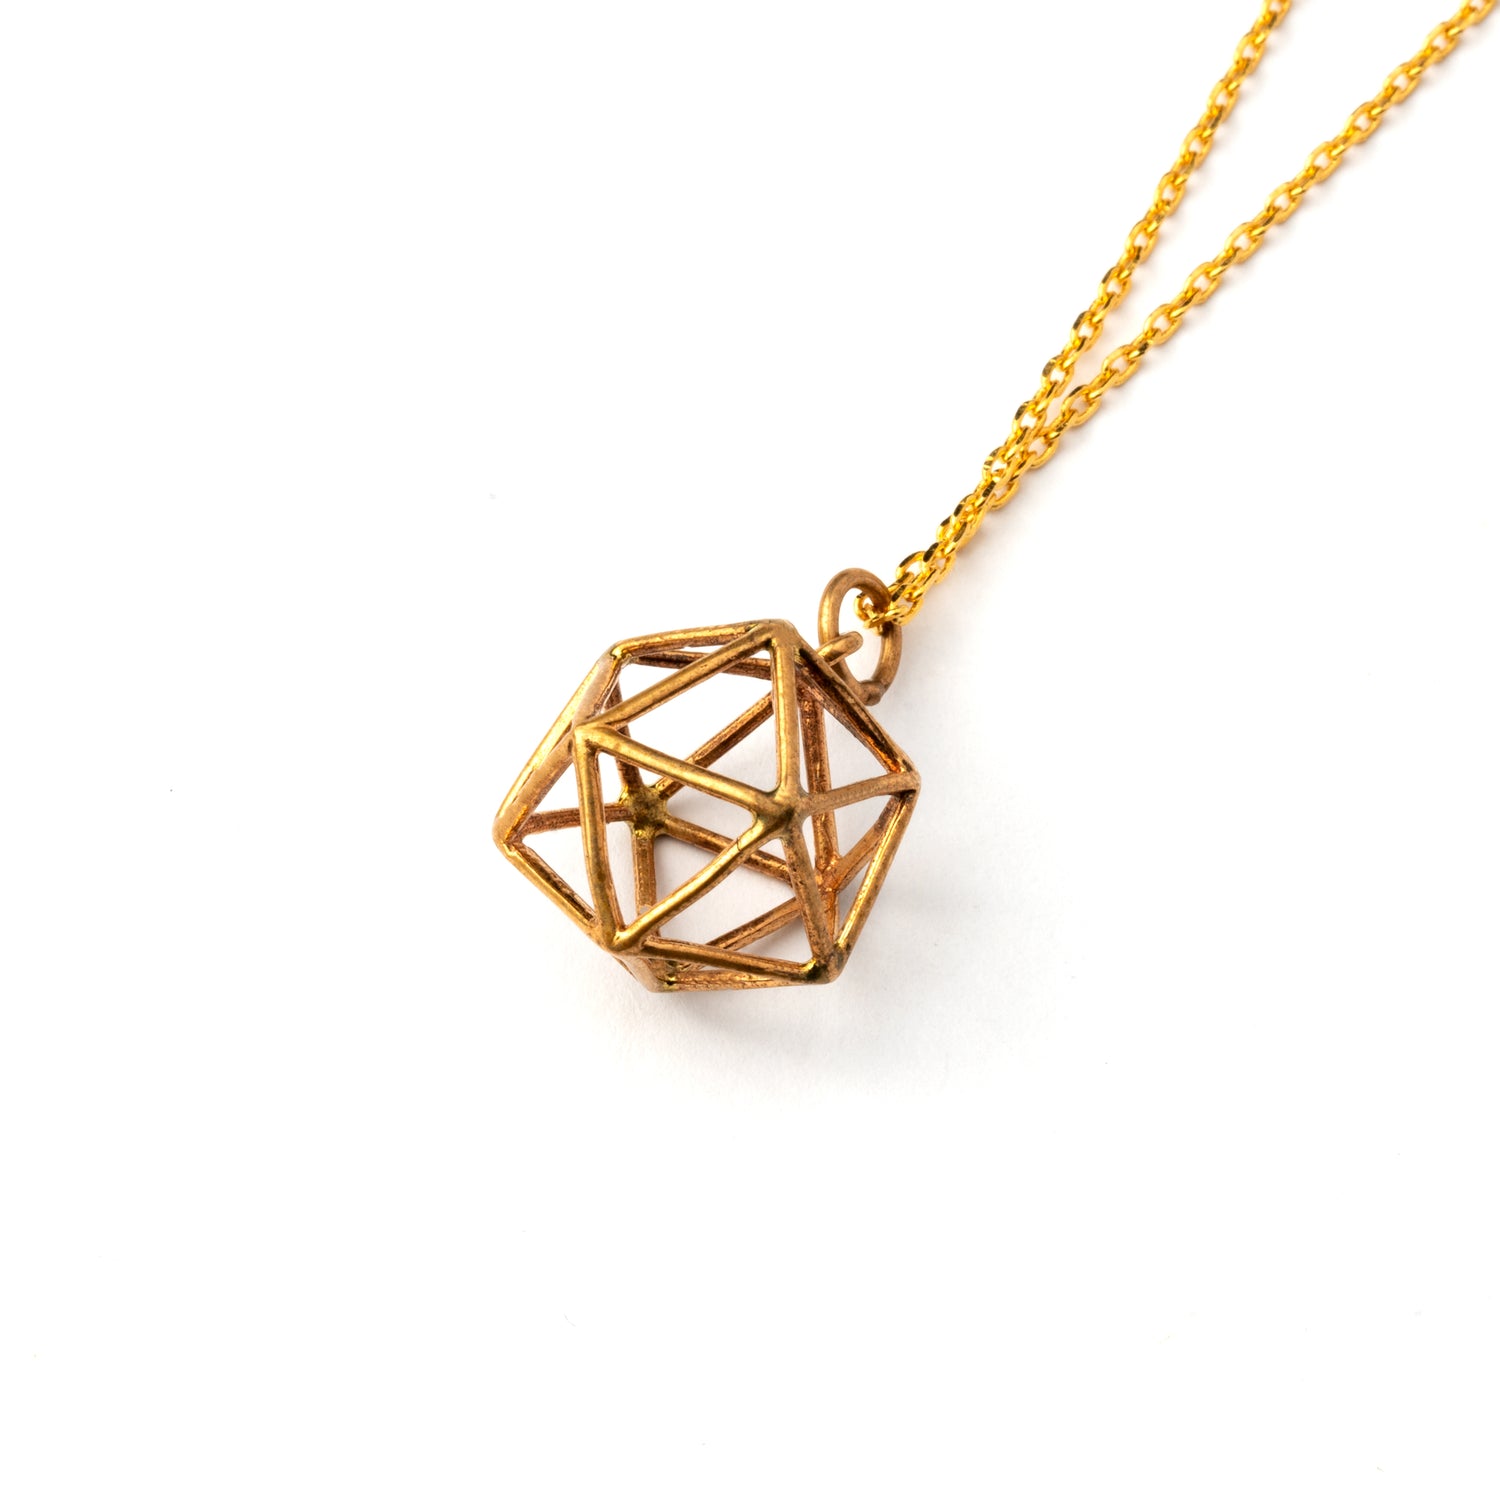 Bronze Icosahedron pendant necklace right side view